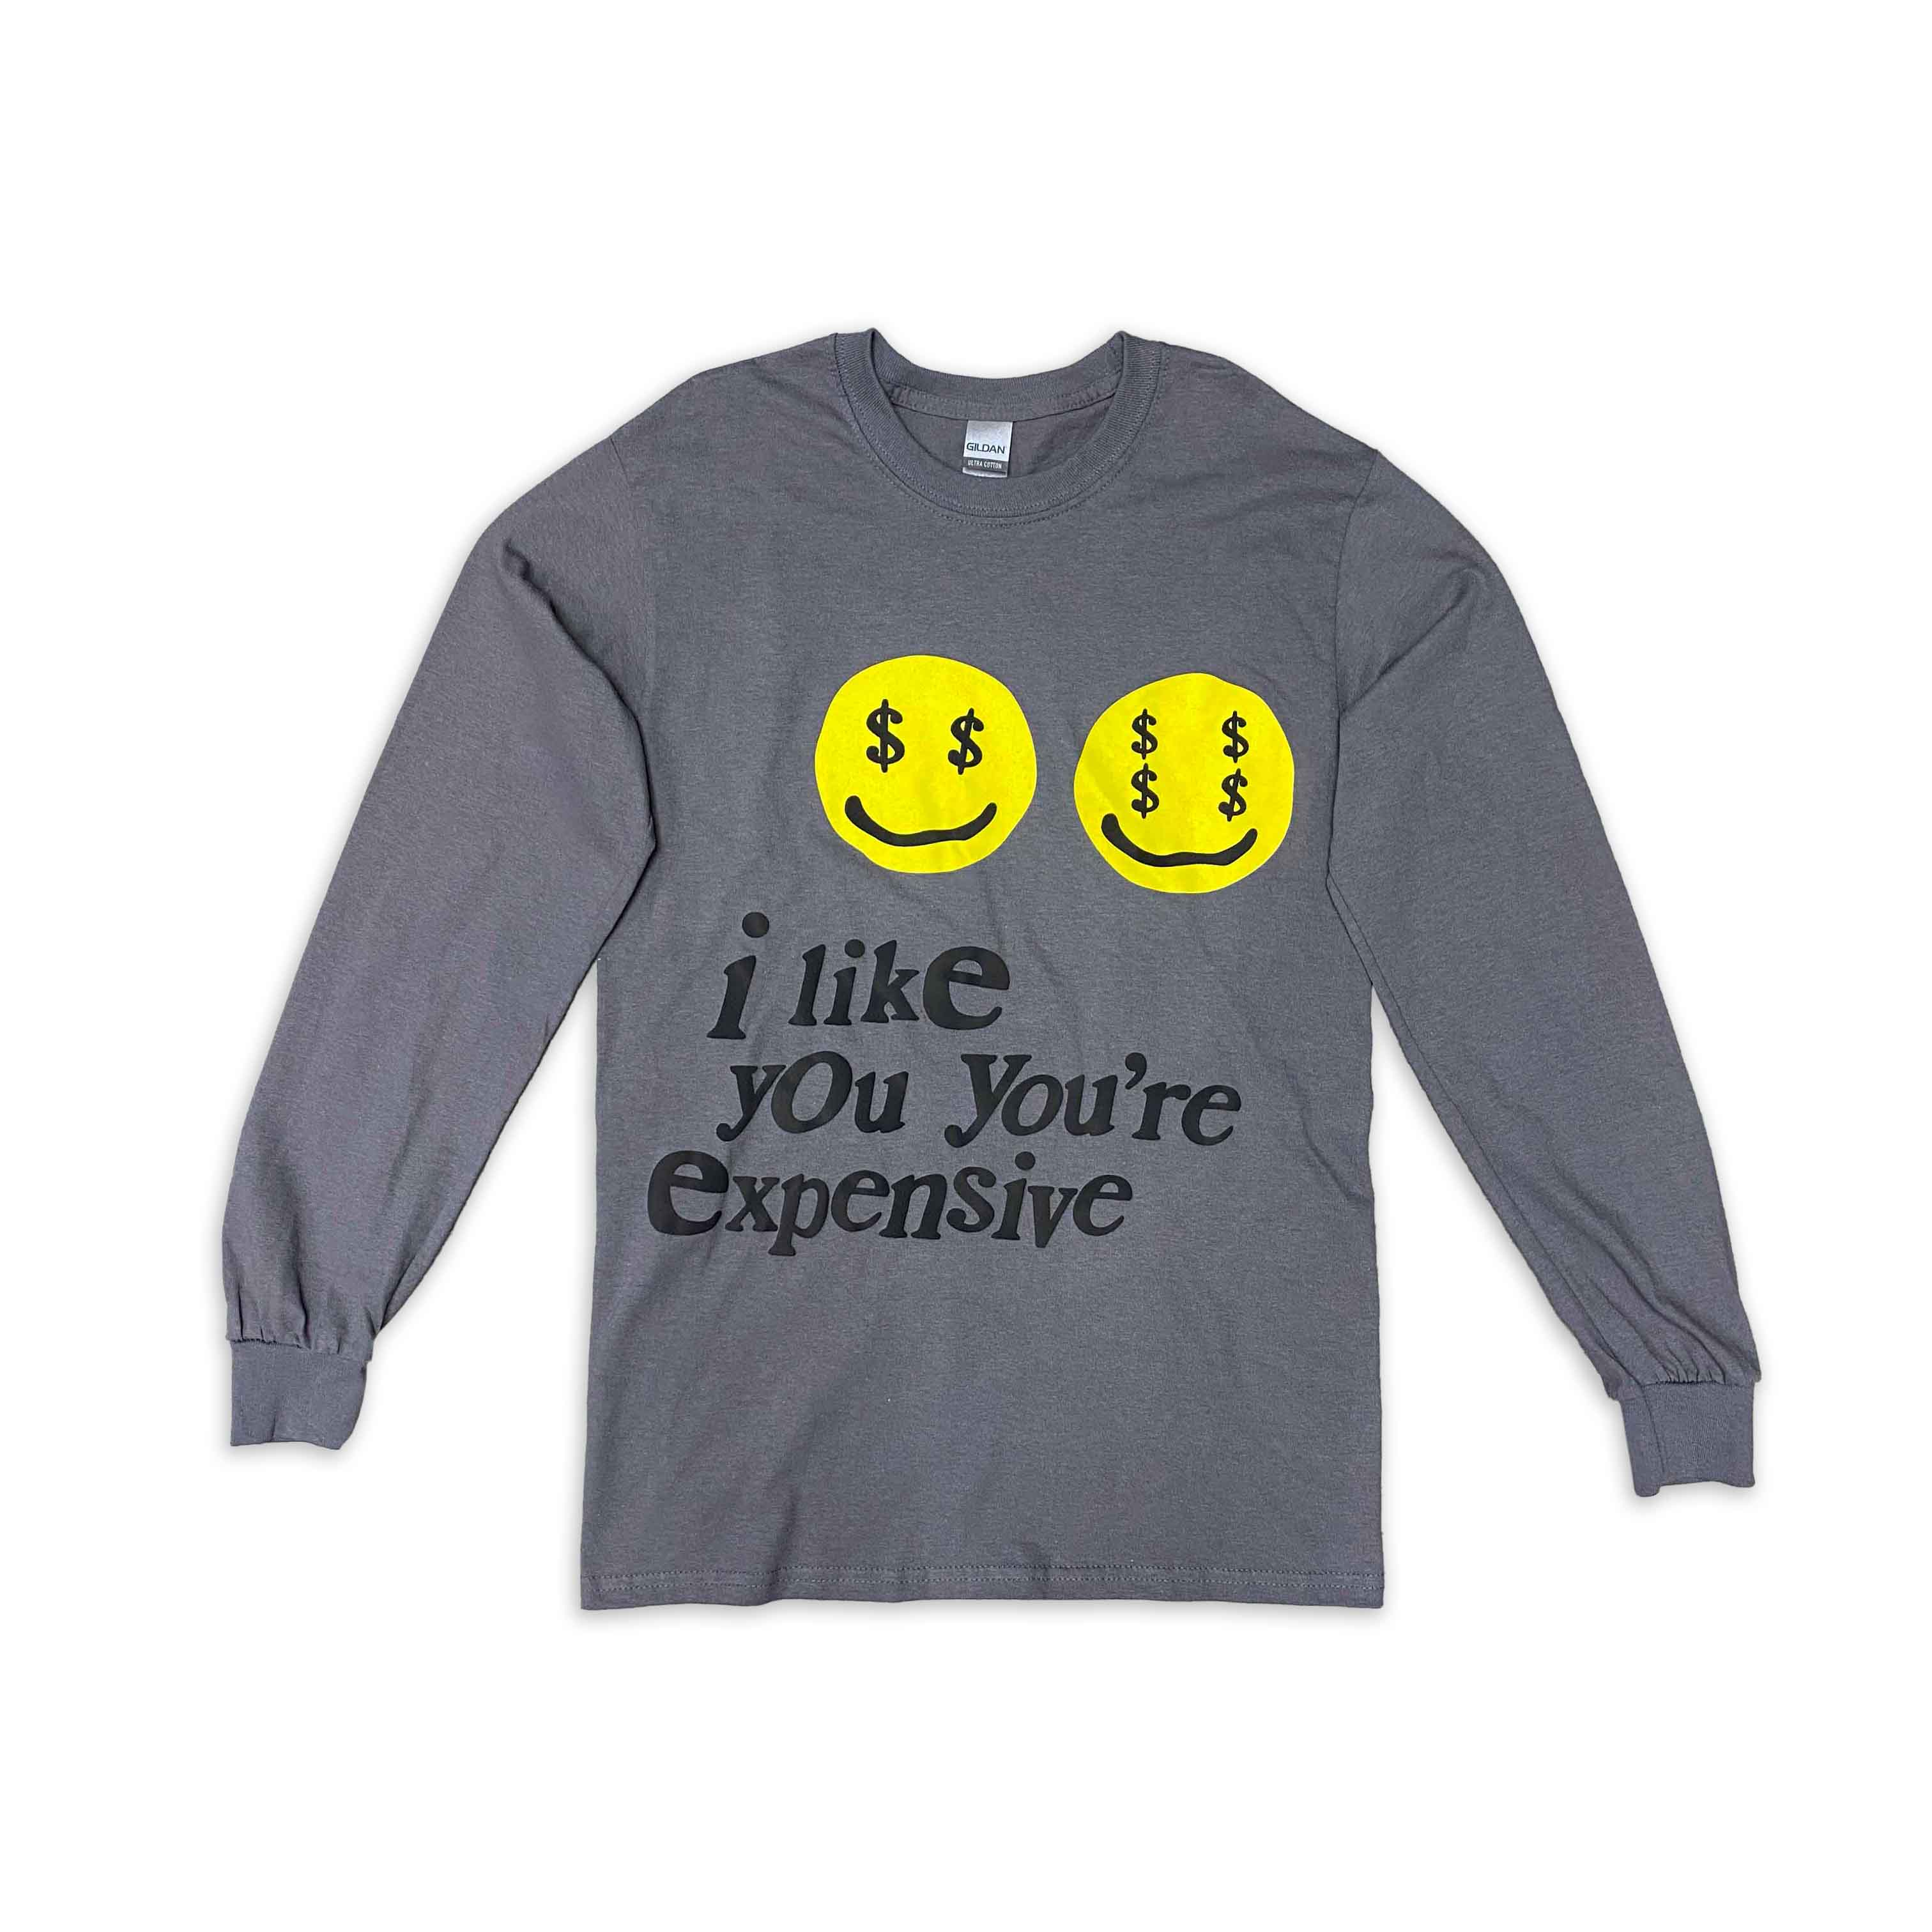 Soled Out Long Sleeve "EXPENSIVE" Charcoal New Size M